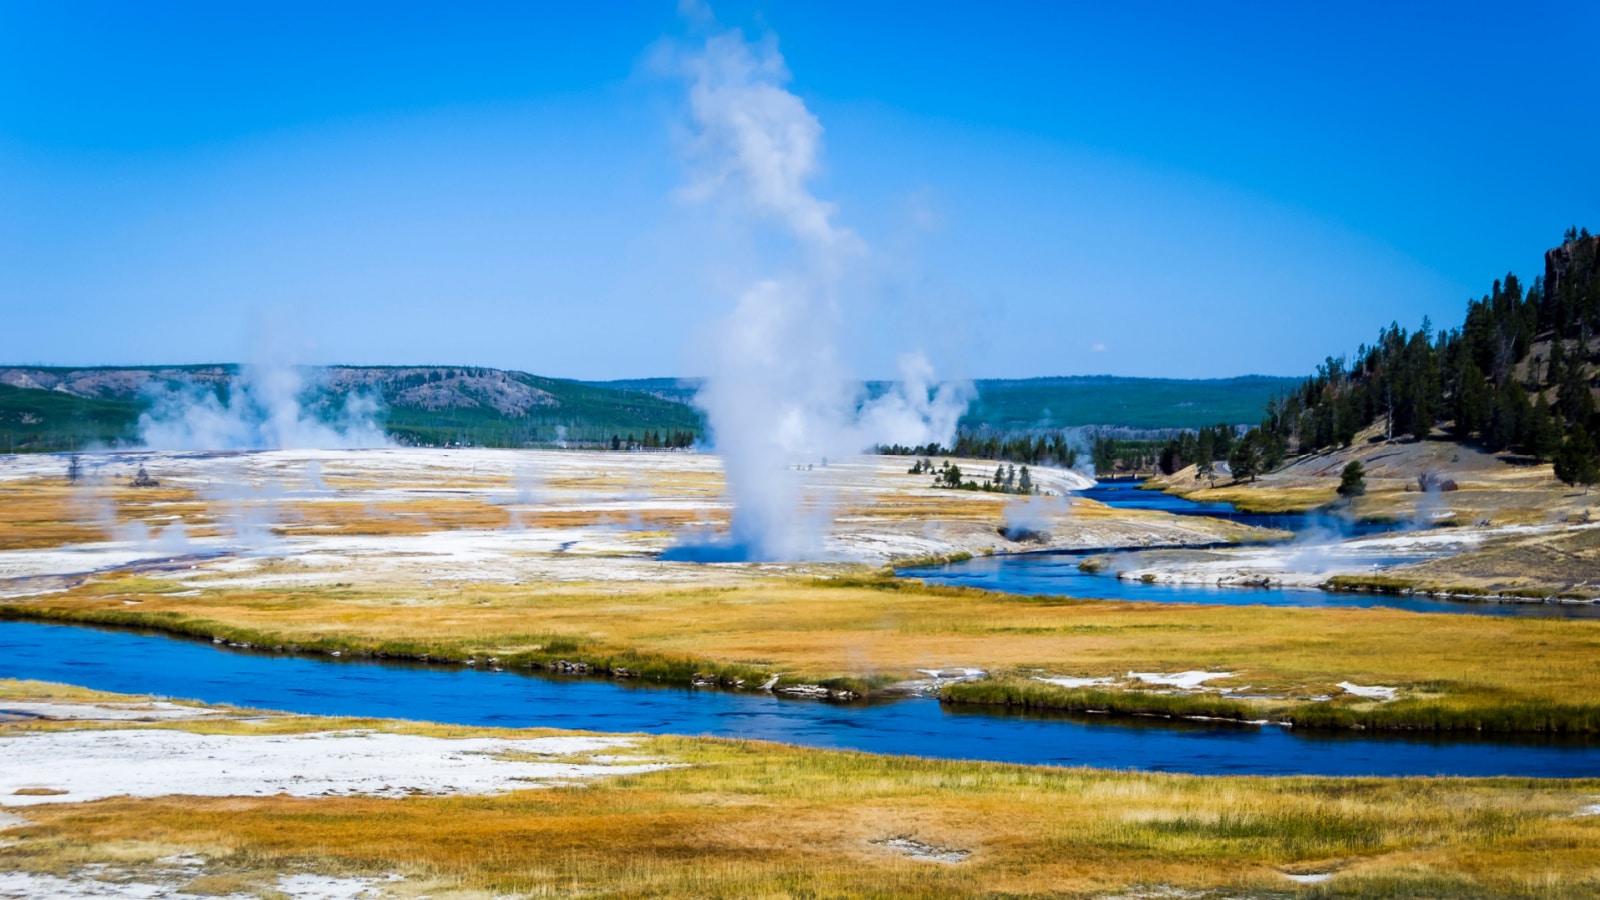 <p>The hydrothermal features in Yellowstone, which include geysers, hot springs, and boiling mud pots, are beautiful and unique but also extremely dangerous. The high temperatures, unpredictable nature of the thermal features, and the acidic or toxic nature of some of the water can pose serious risks to visitors.</p> <p>Over the years, there have been incidents where individuals have fallen into boiling hot springs or other thermal features, resulting in severe burns or fatalities. The high temperatures of these geothermal features can cause rapid and fatal injuries, making them extremely hazardous to anyone who ventures off designated paths or ignores safety regulations. Yellowstone National Park places a strong emphasis on safety and has warning signs, barriers, and guidelines in place to keep visitors safe around the hydrothermal areas.</p>